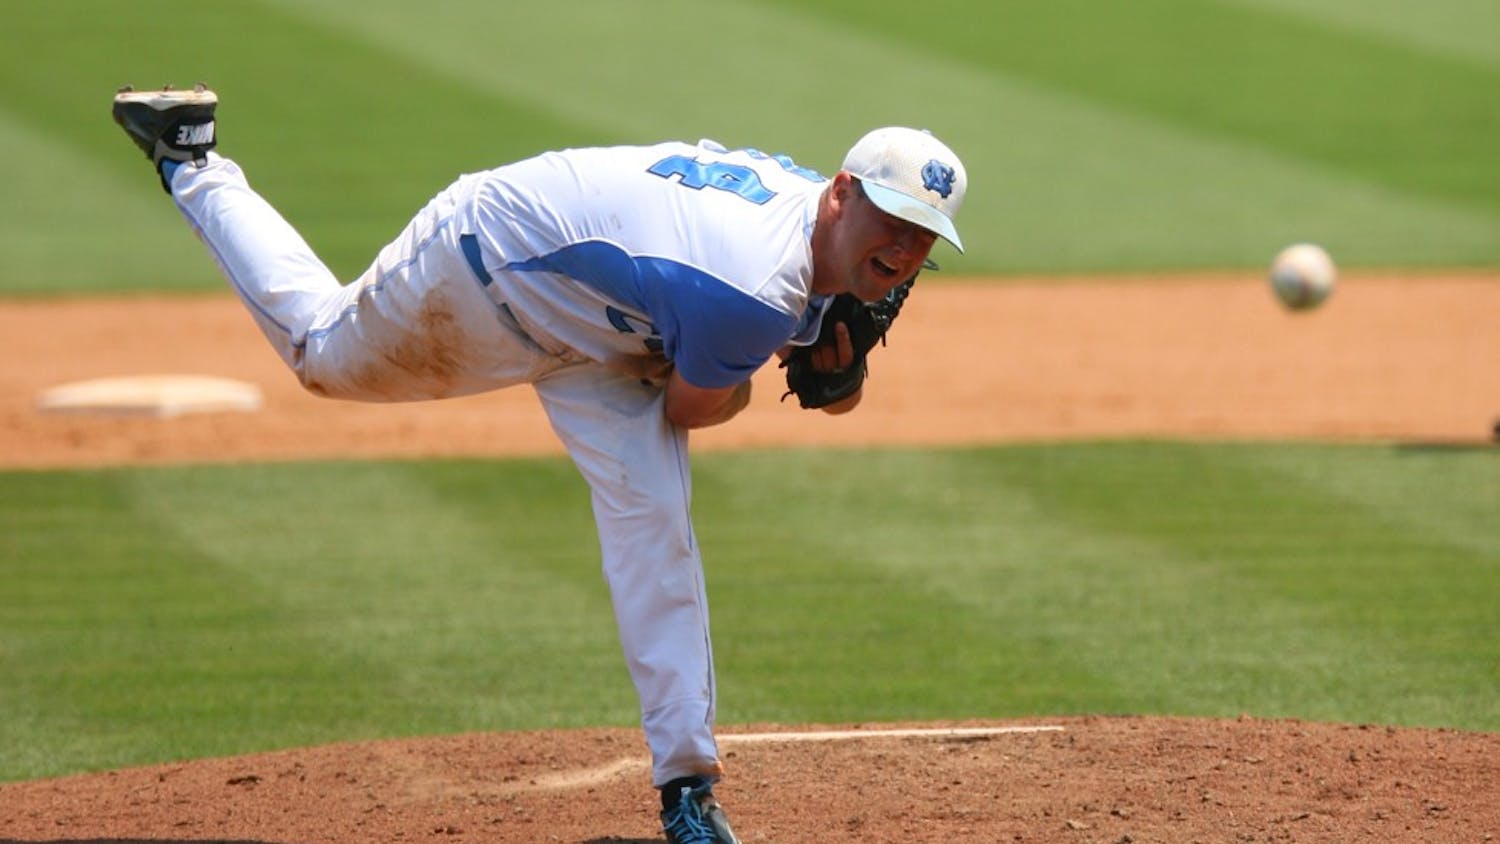 Photo: Greg Holt finds starring role for UNC baseball (Erin Hull)